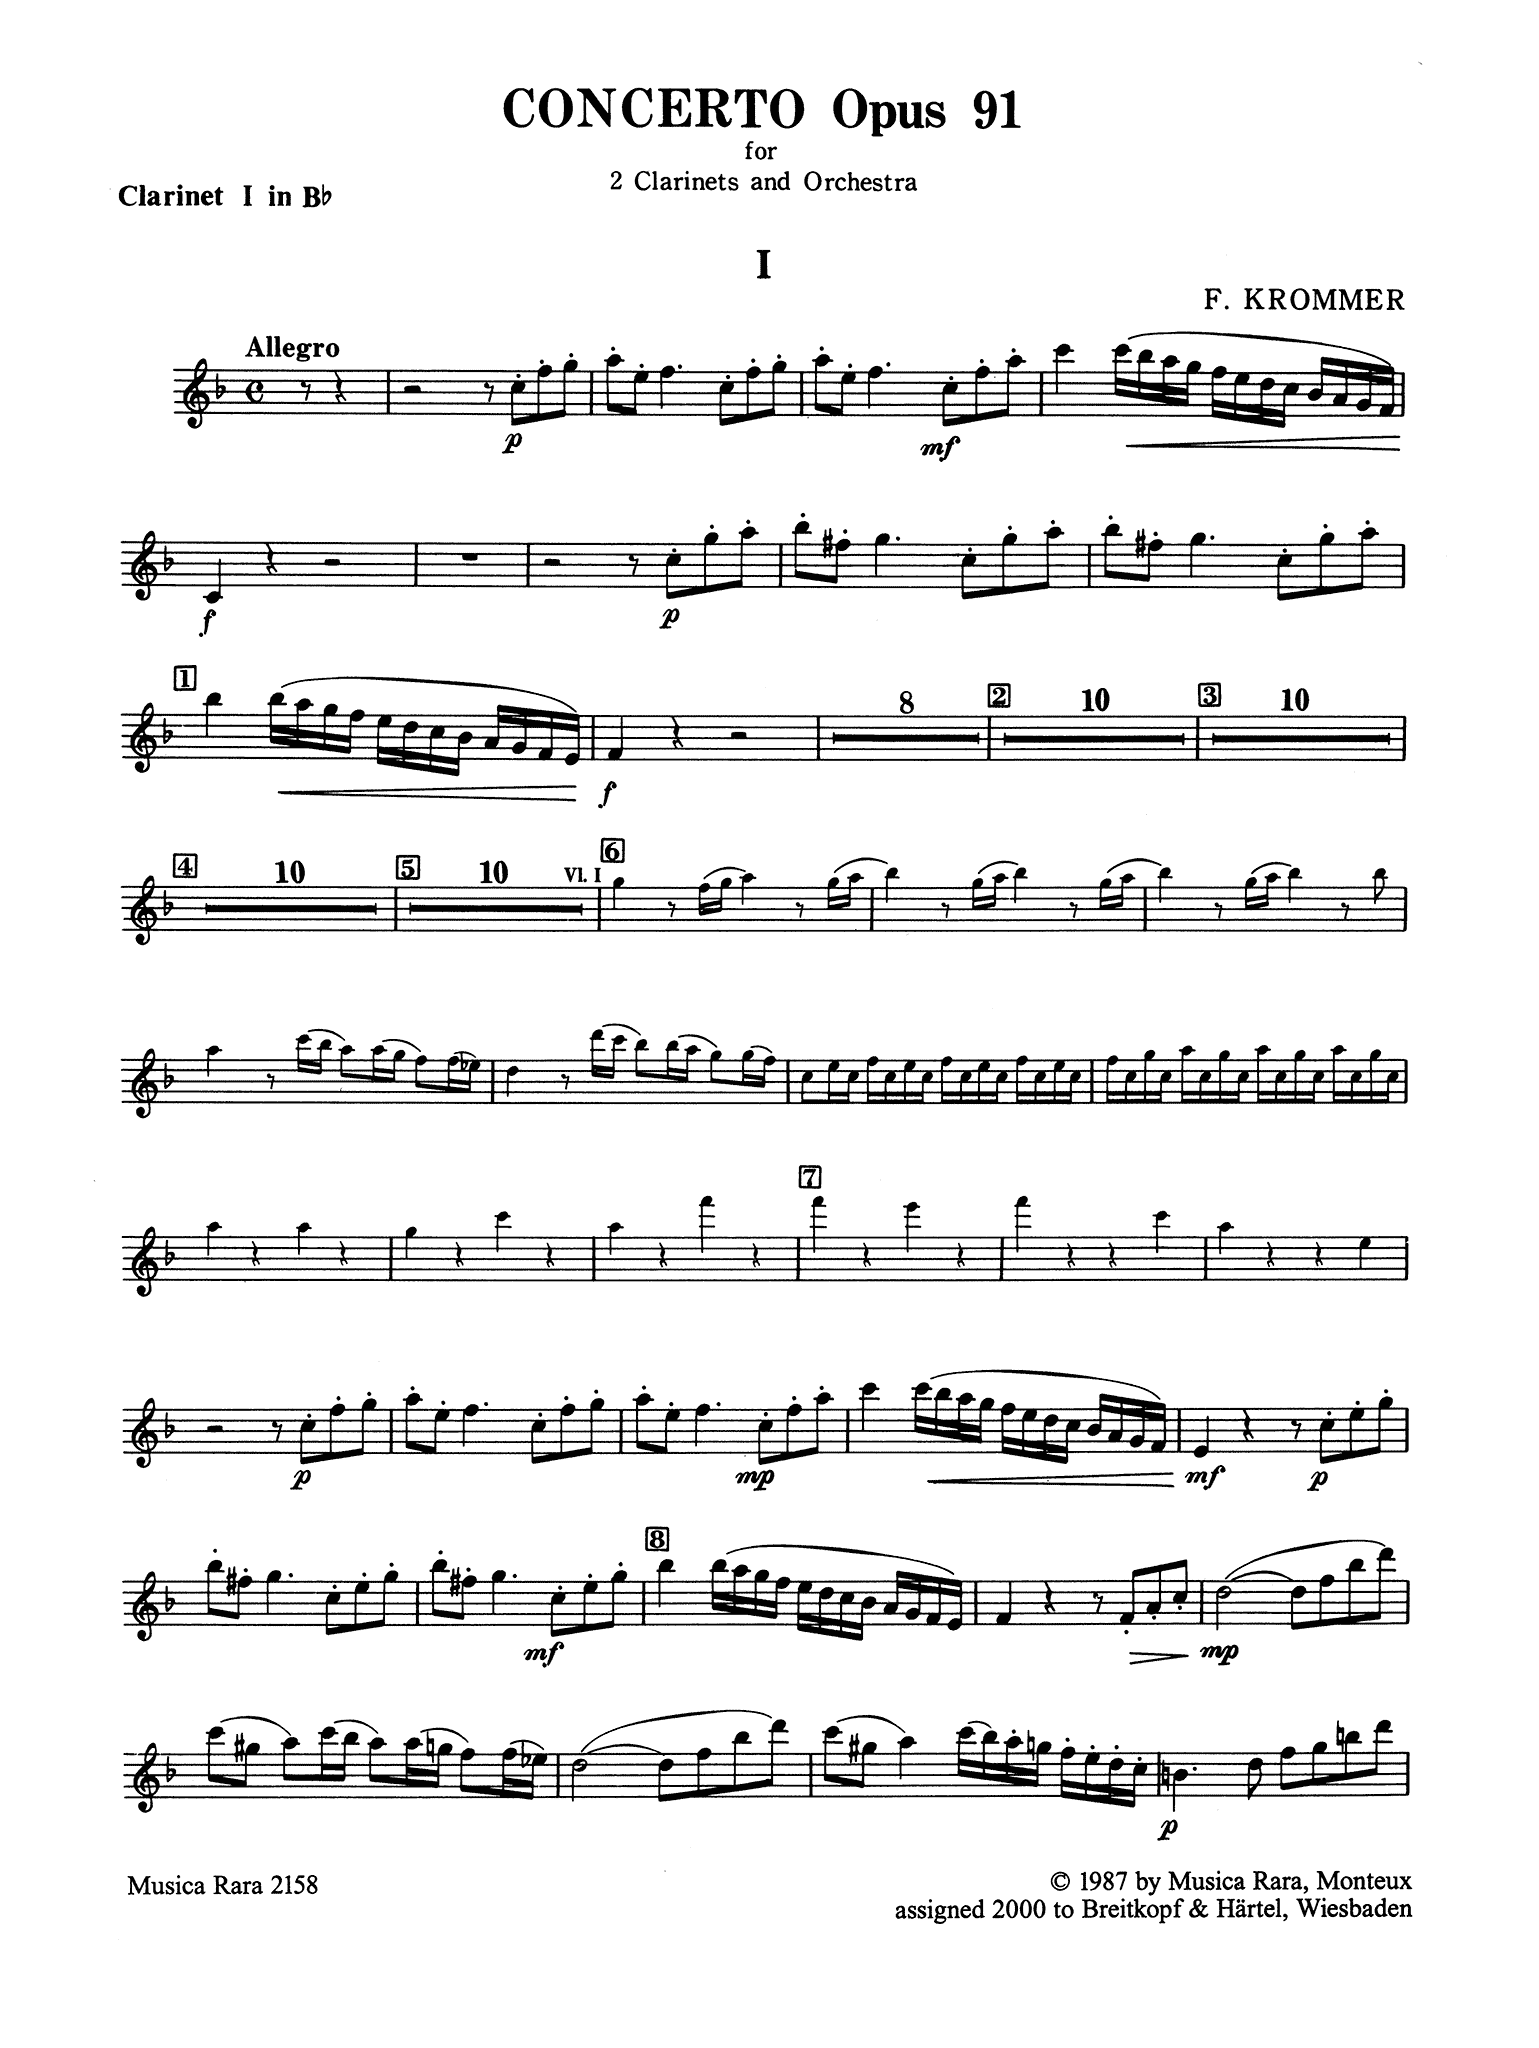 Concerto for 2 Clarinets in E-flat Major, Op. 91 First Clarinet part